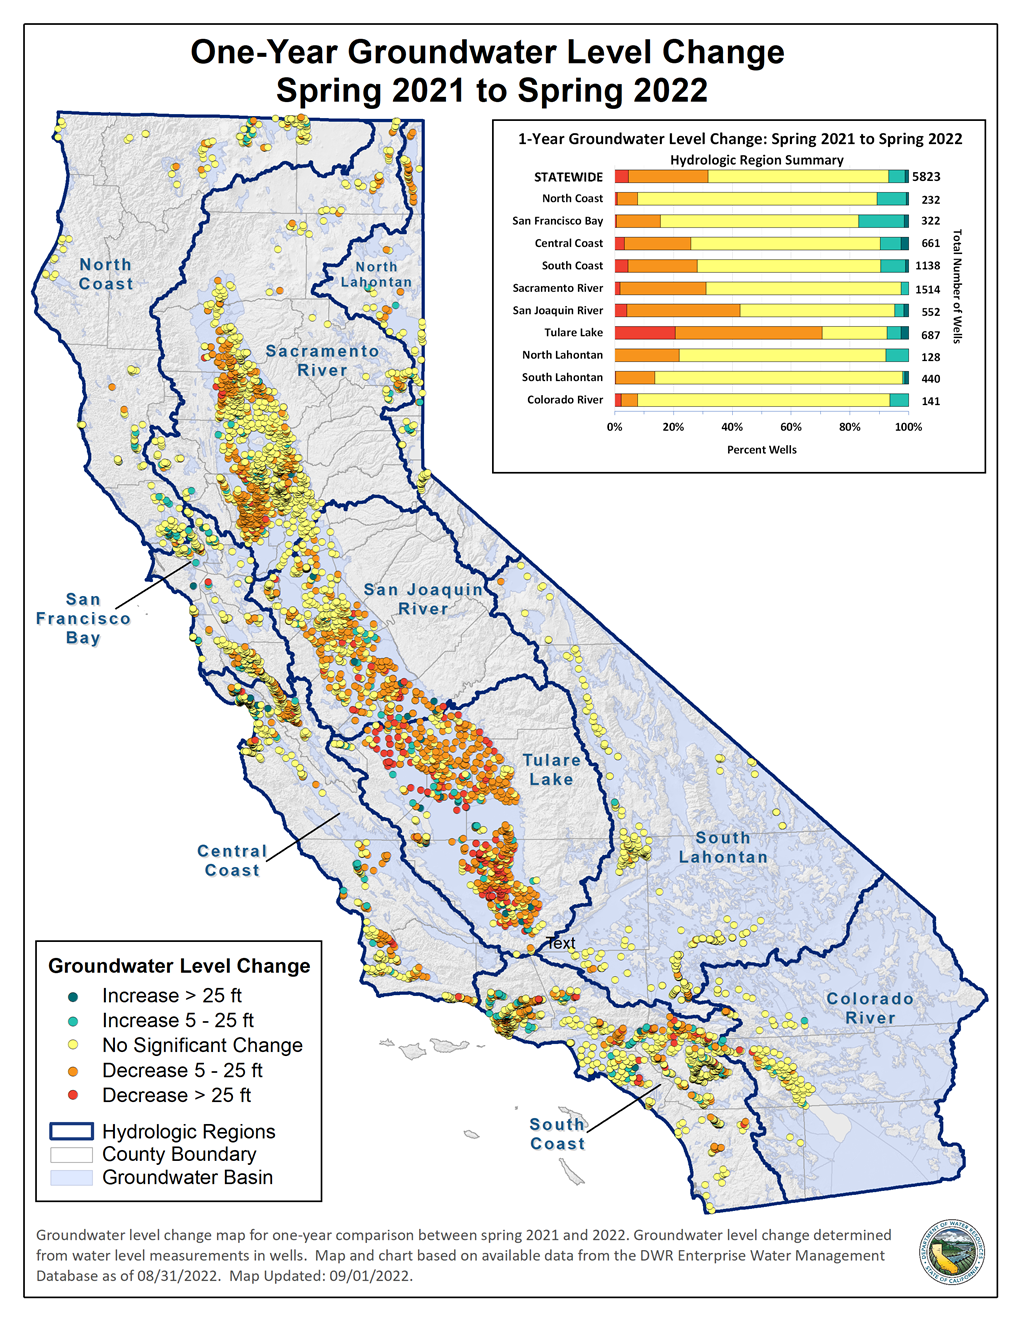 Map of California depicting the one-year groundwater level change from Spring 2021 to Spring 2022.